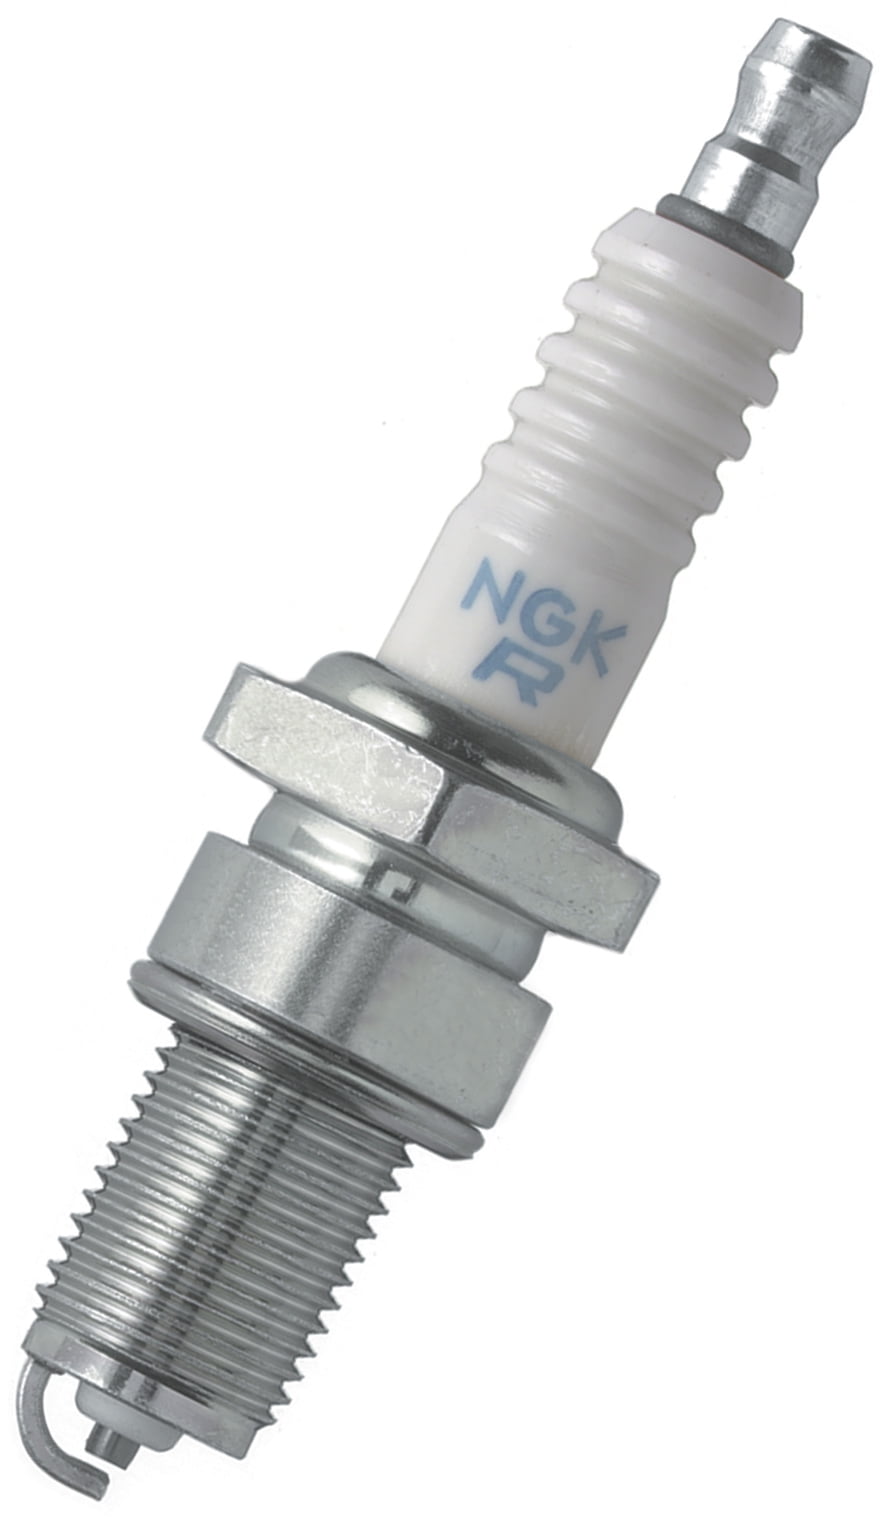 NGK Spark Plug for Honda Engines & Other Small Engines, 6775